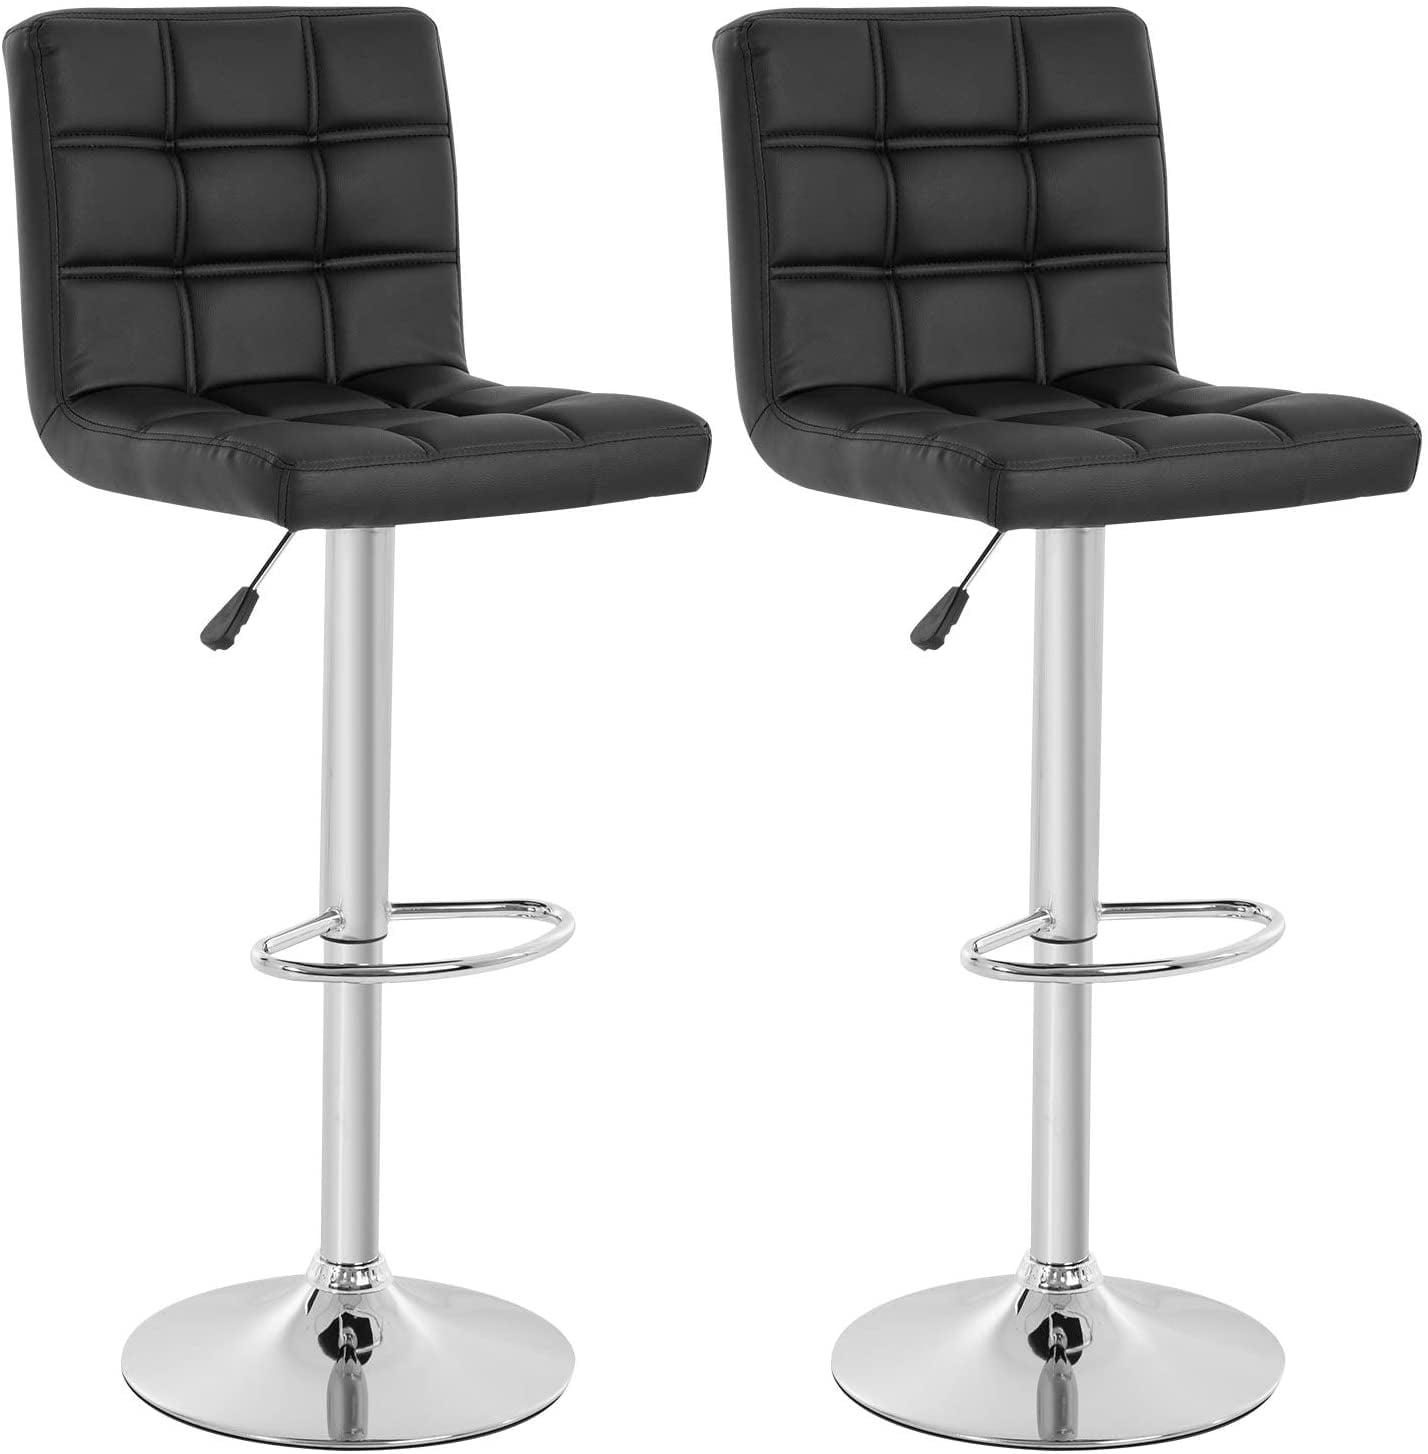 YOUTASTE Black Bar Stools Set of 2 PU Leather Upholstered Counter Height Bar Stool,Adjustable Swivel Metal Thickened Bar Chairs with Back,Home and Kitchen Island Stools 